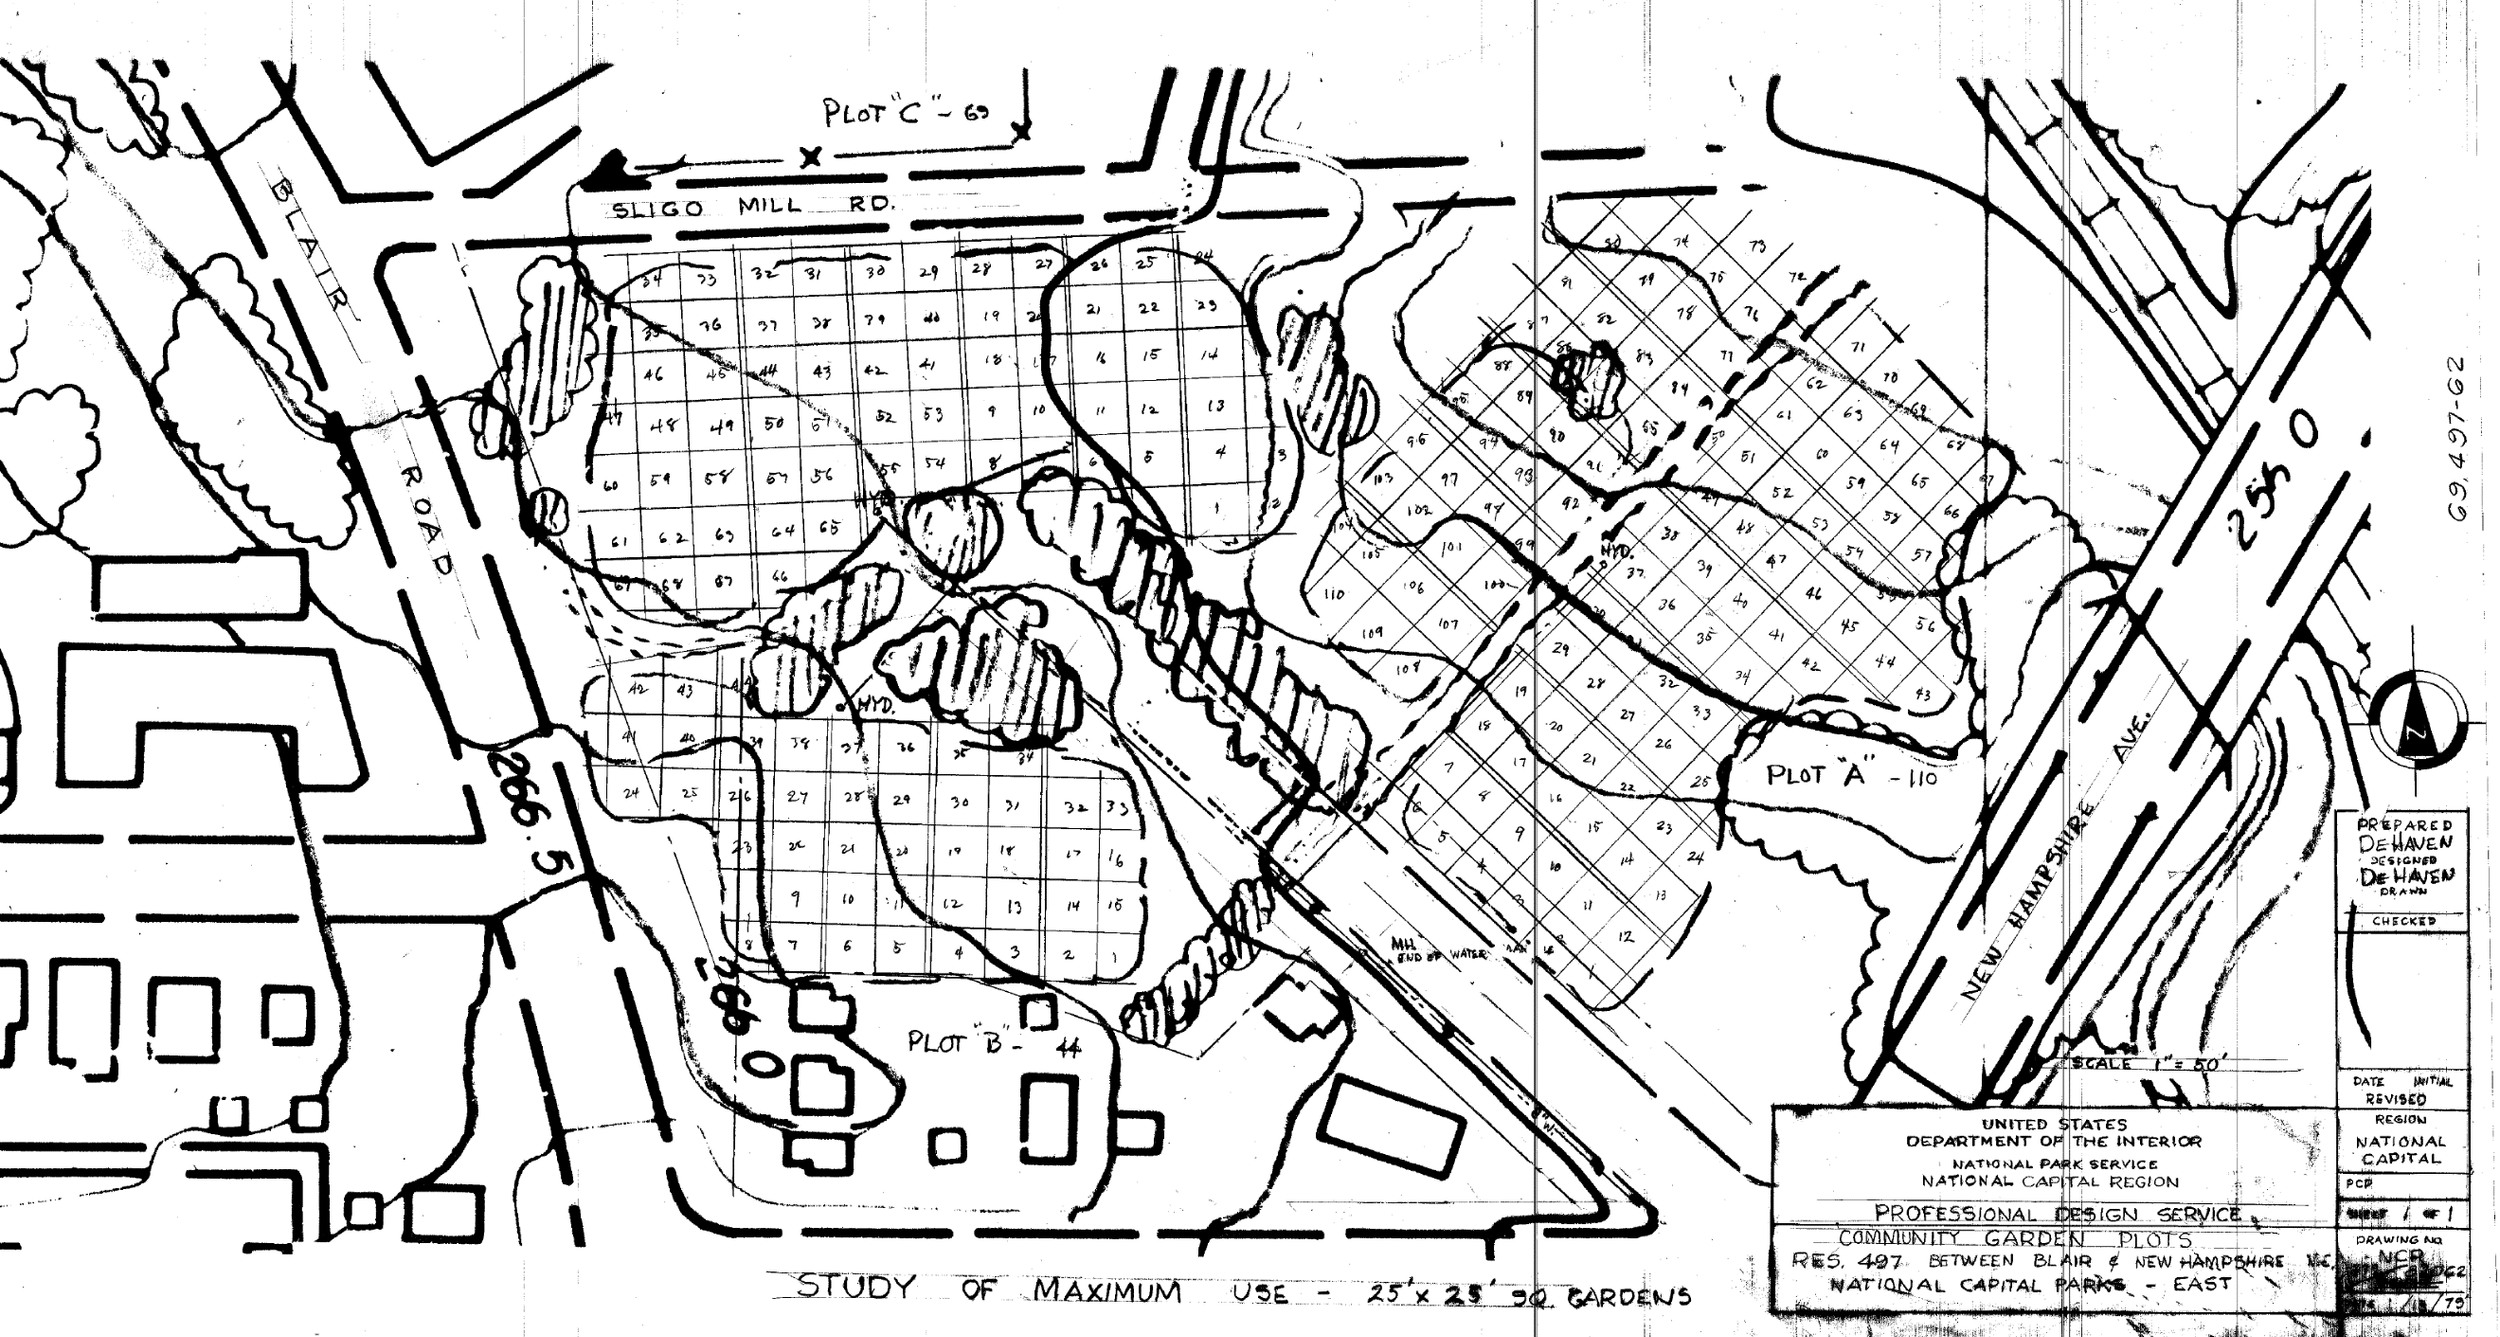  In 1979, under new community garden guidelines, NPS officials worked with Blair Road Community Garden members to map the garden’s layout. By this time the garden featured 110 plots that measured 25’ x 25.’ (TIC 832_8037 1965)  